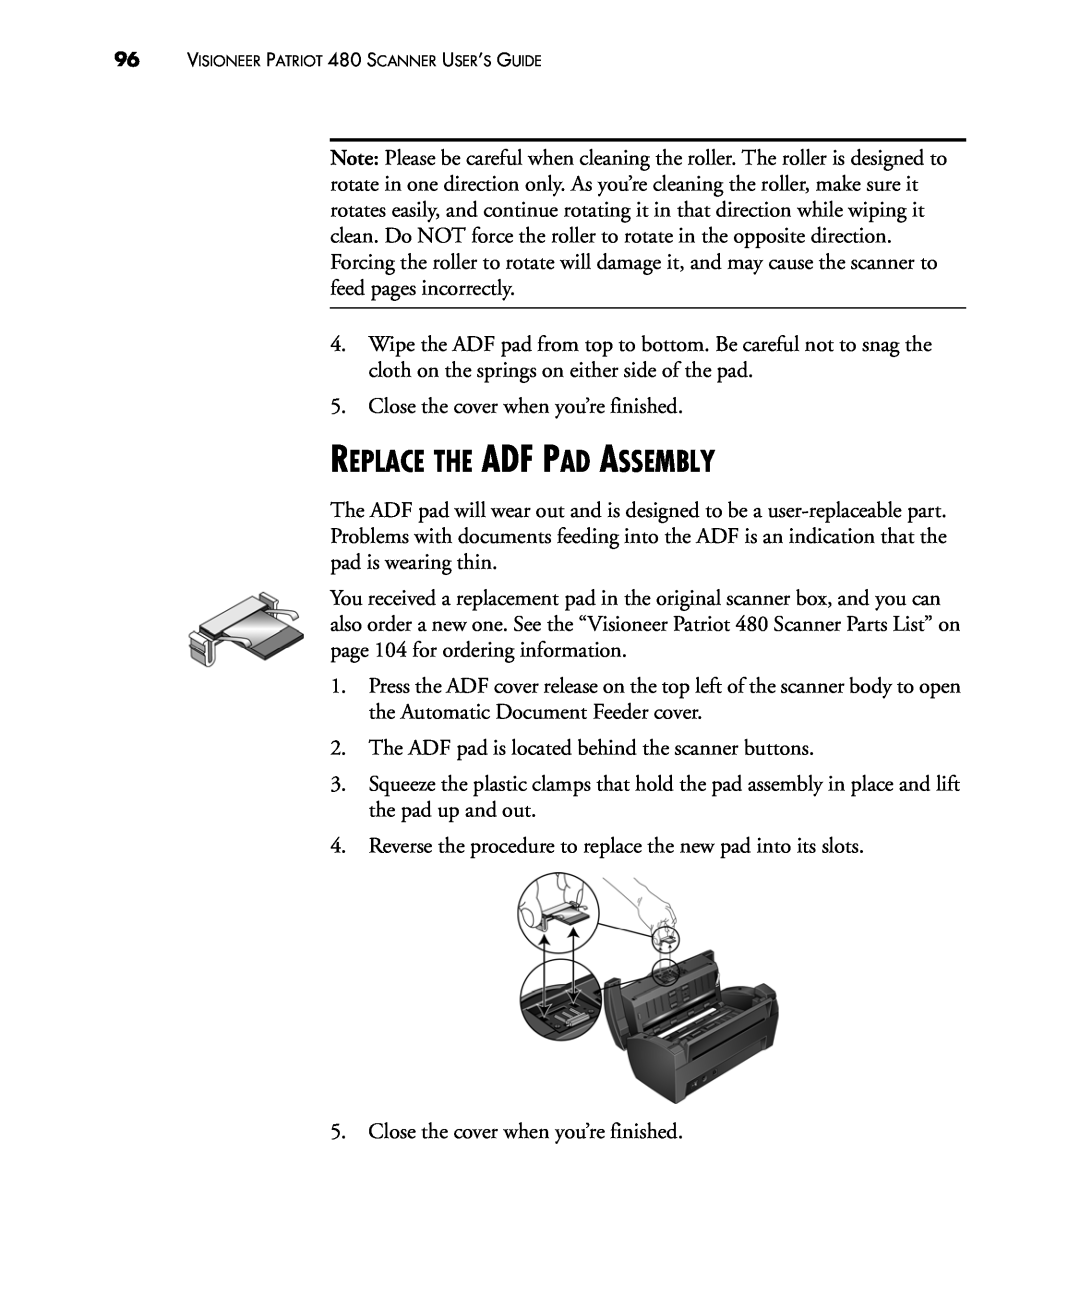 Visioneer manual Replace The Adf Pad Assembly, VISIONEER PATRIOT 480 SCANNER USER’S GUIDE 